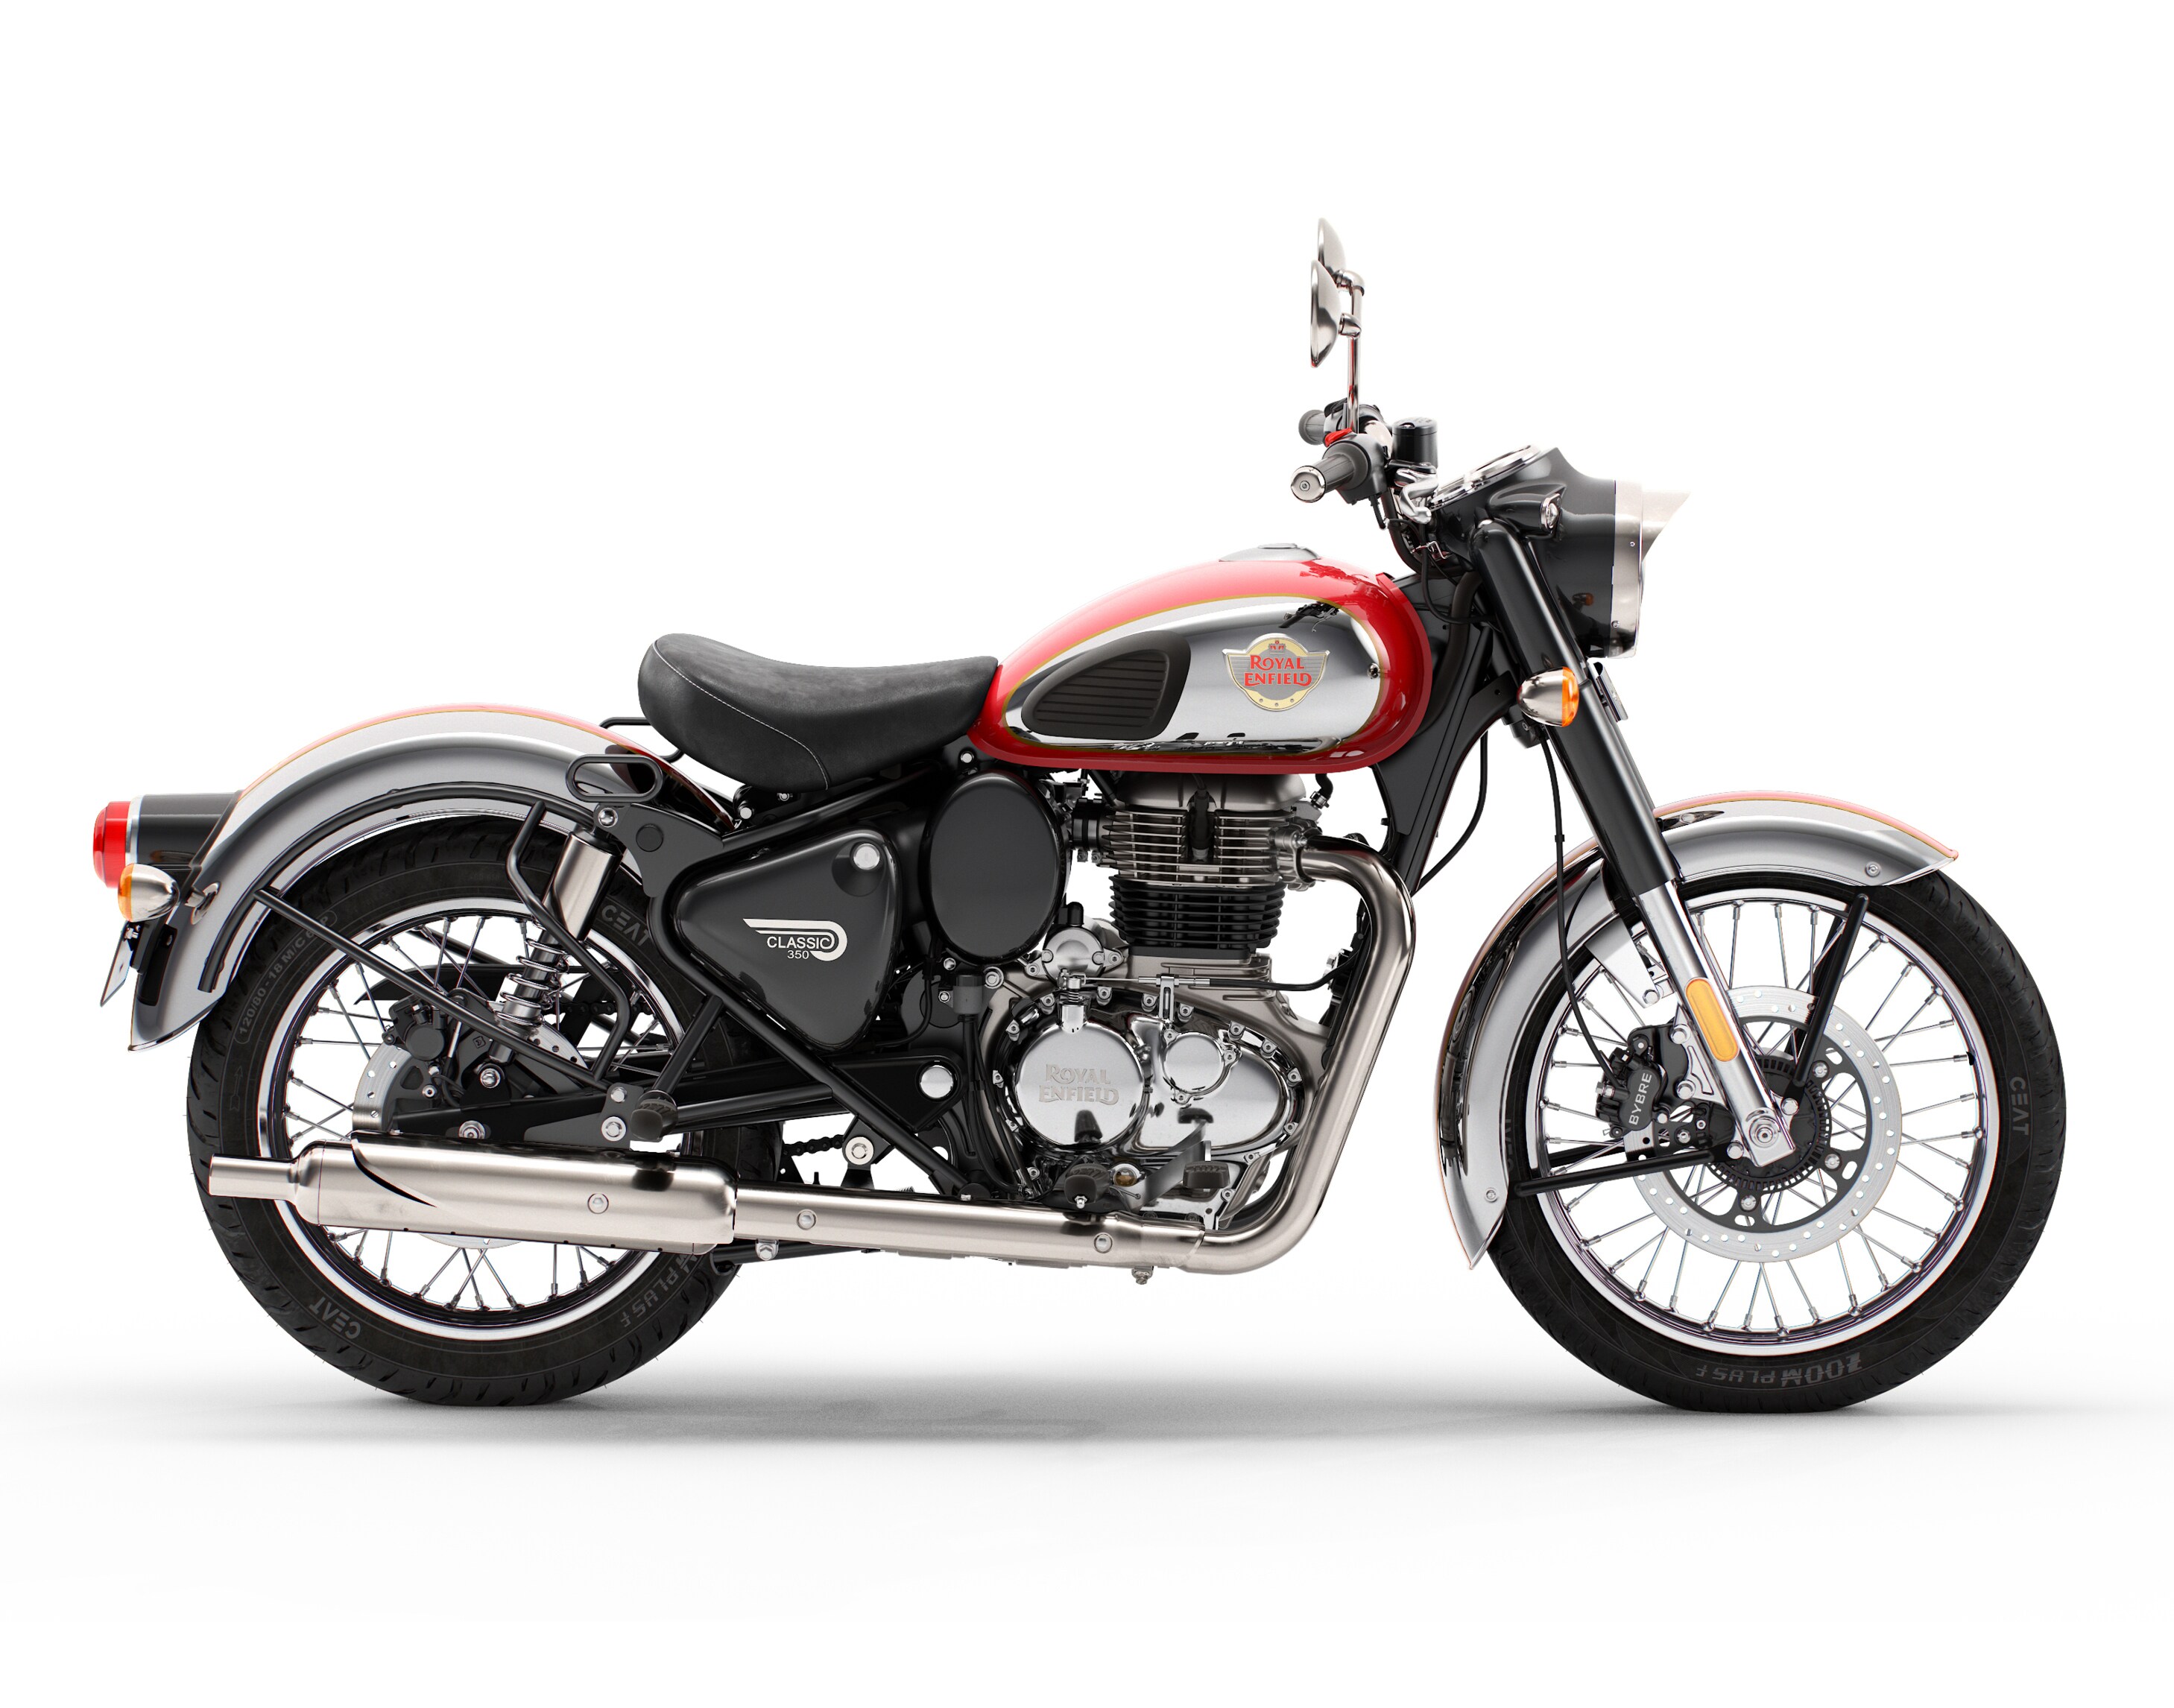 New Royal Enfield Motorcycles for Sale in London